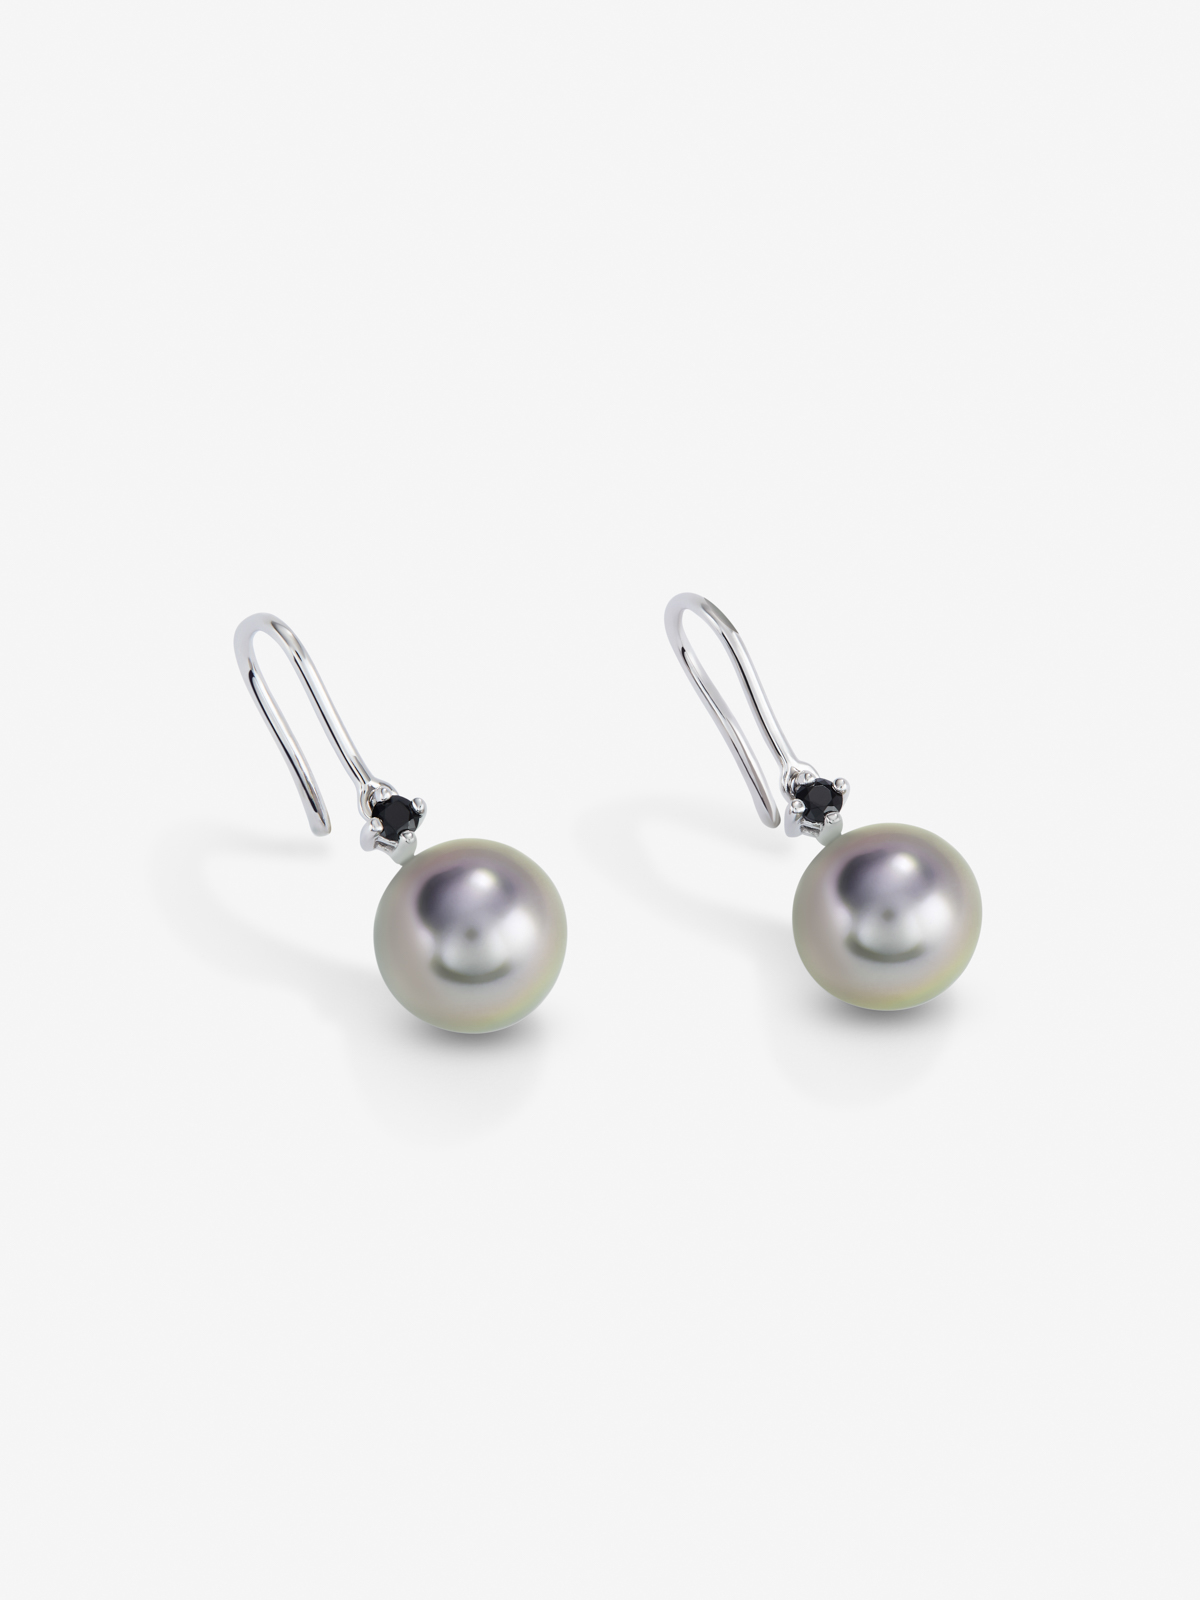 925 Sterling silver drop earring with 8.5 mm Tahitian pearl and spinel.